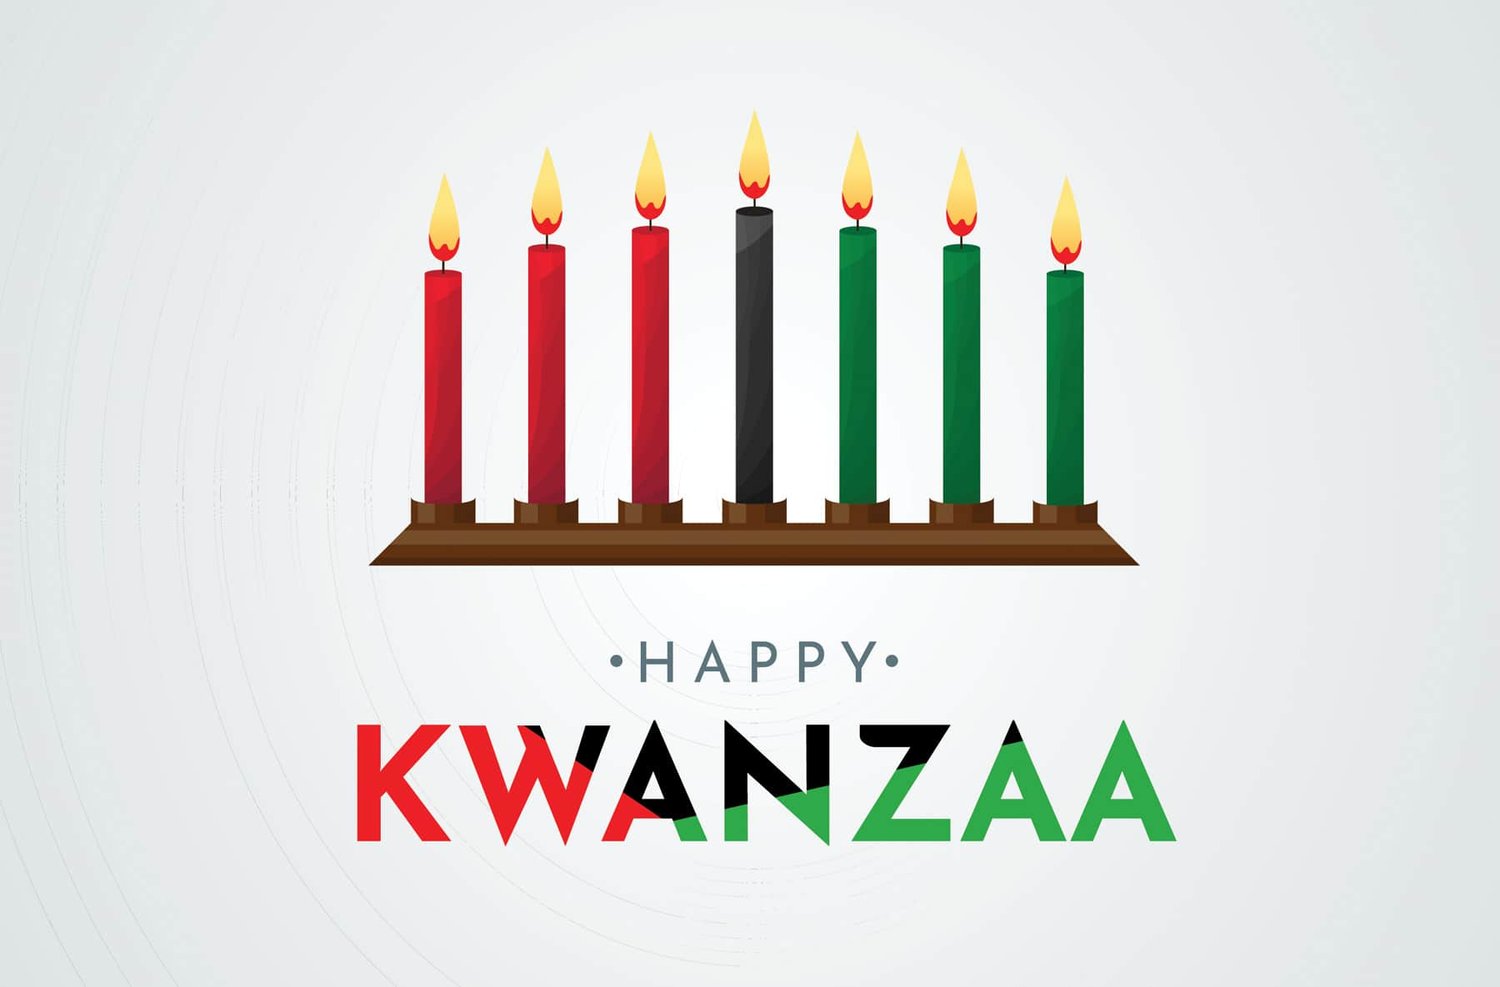 The Seven Principles of Kwanzza